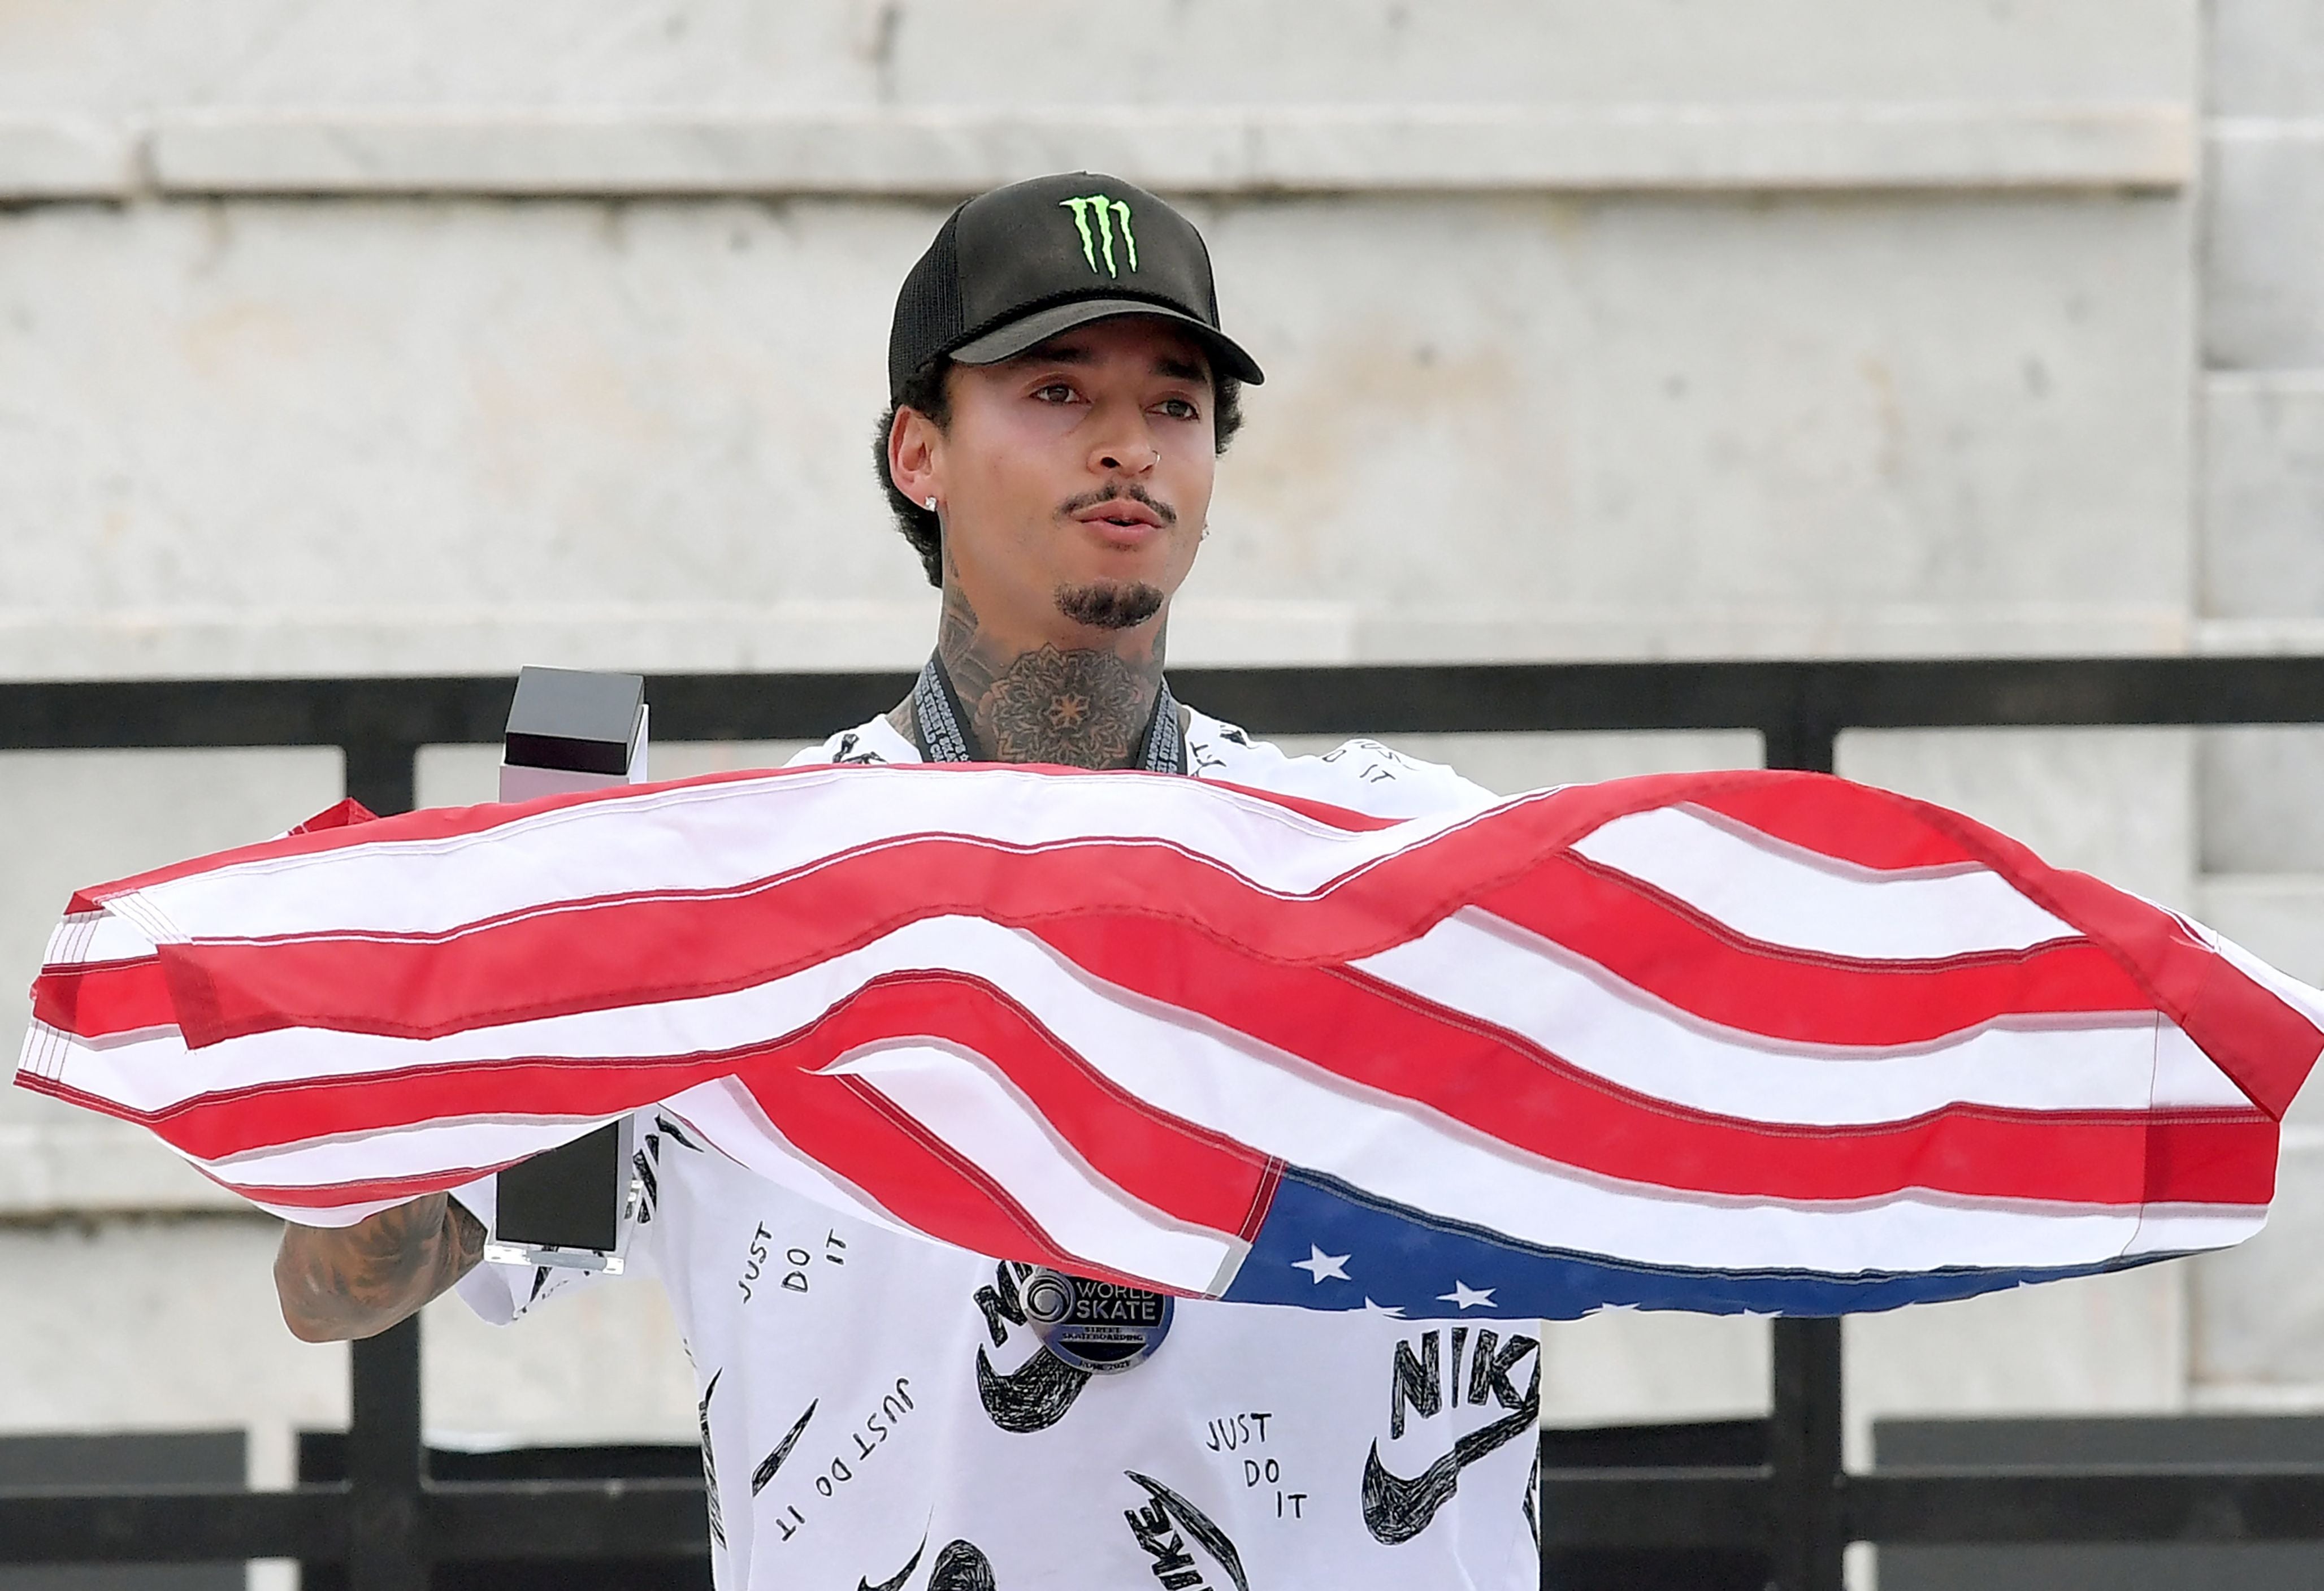 Nyjah Huston Who is Team USA star skateboarder at Tokyo Olympics ? The Independent pic